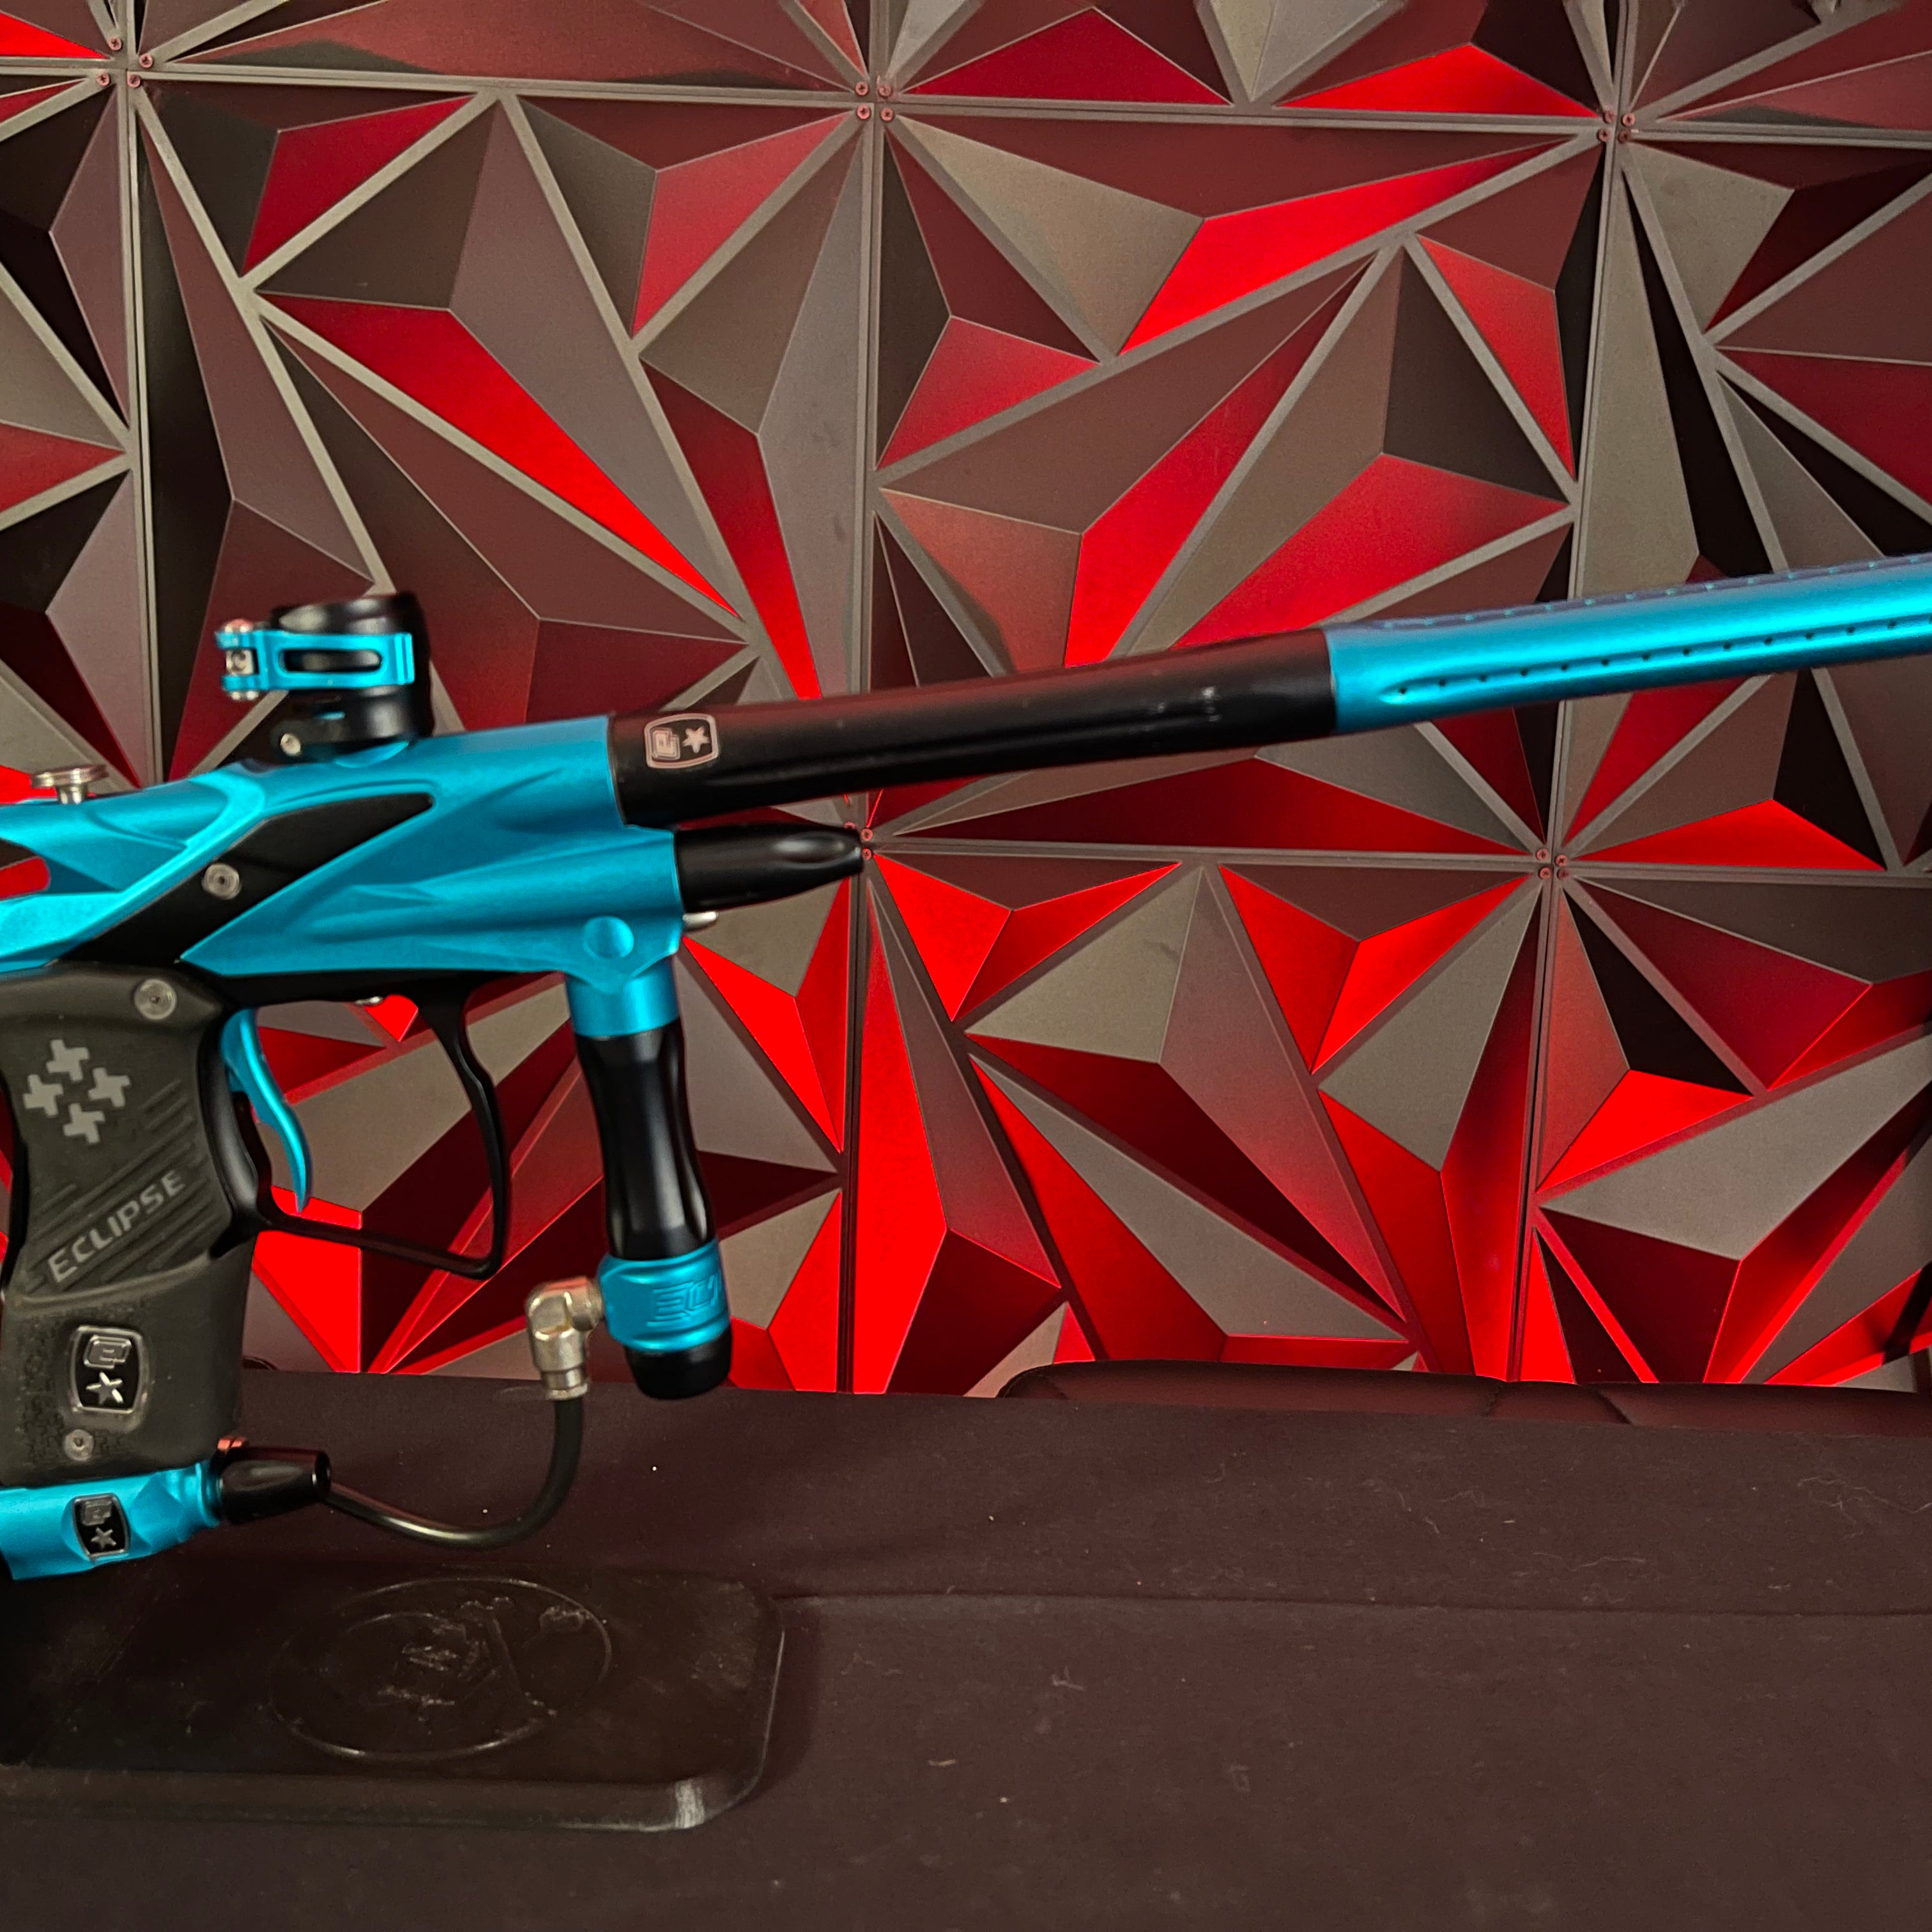 Used Planet Eclipse Ego 9 Paintball Gun - Blue/Black